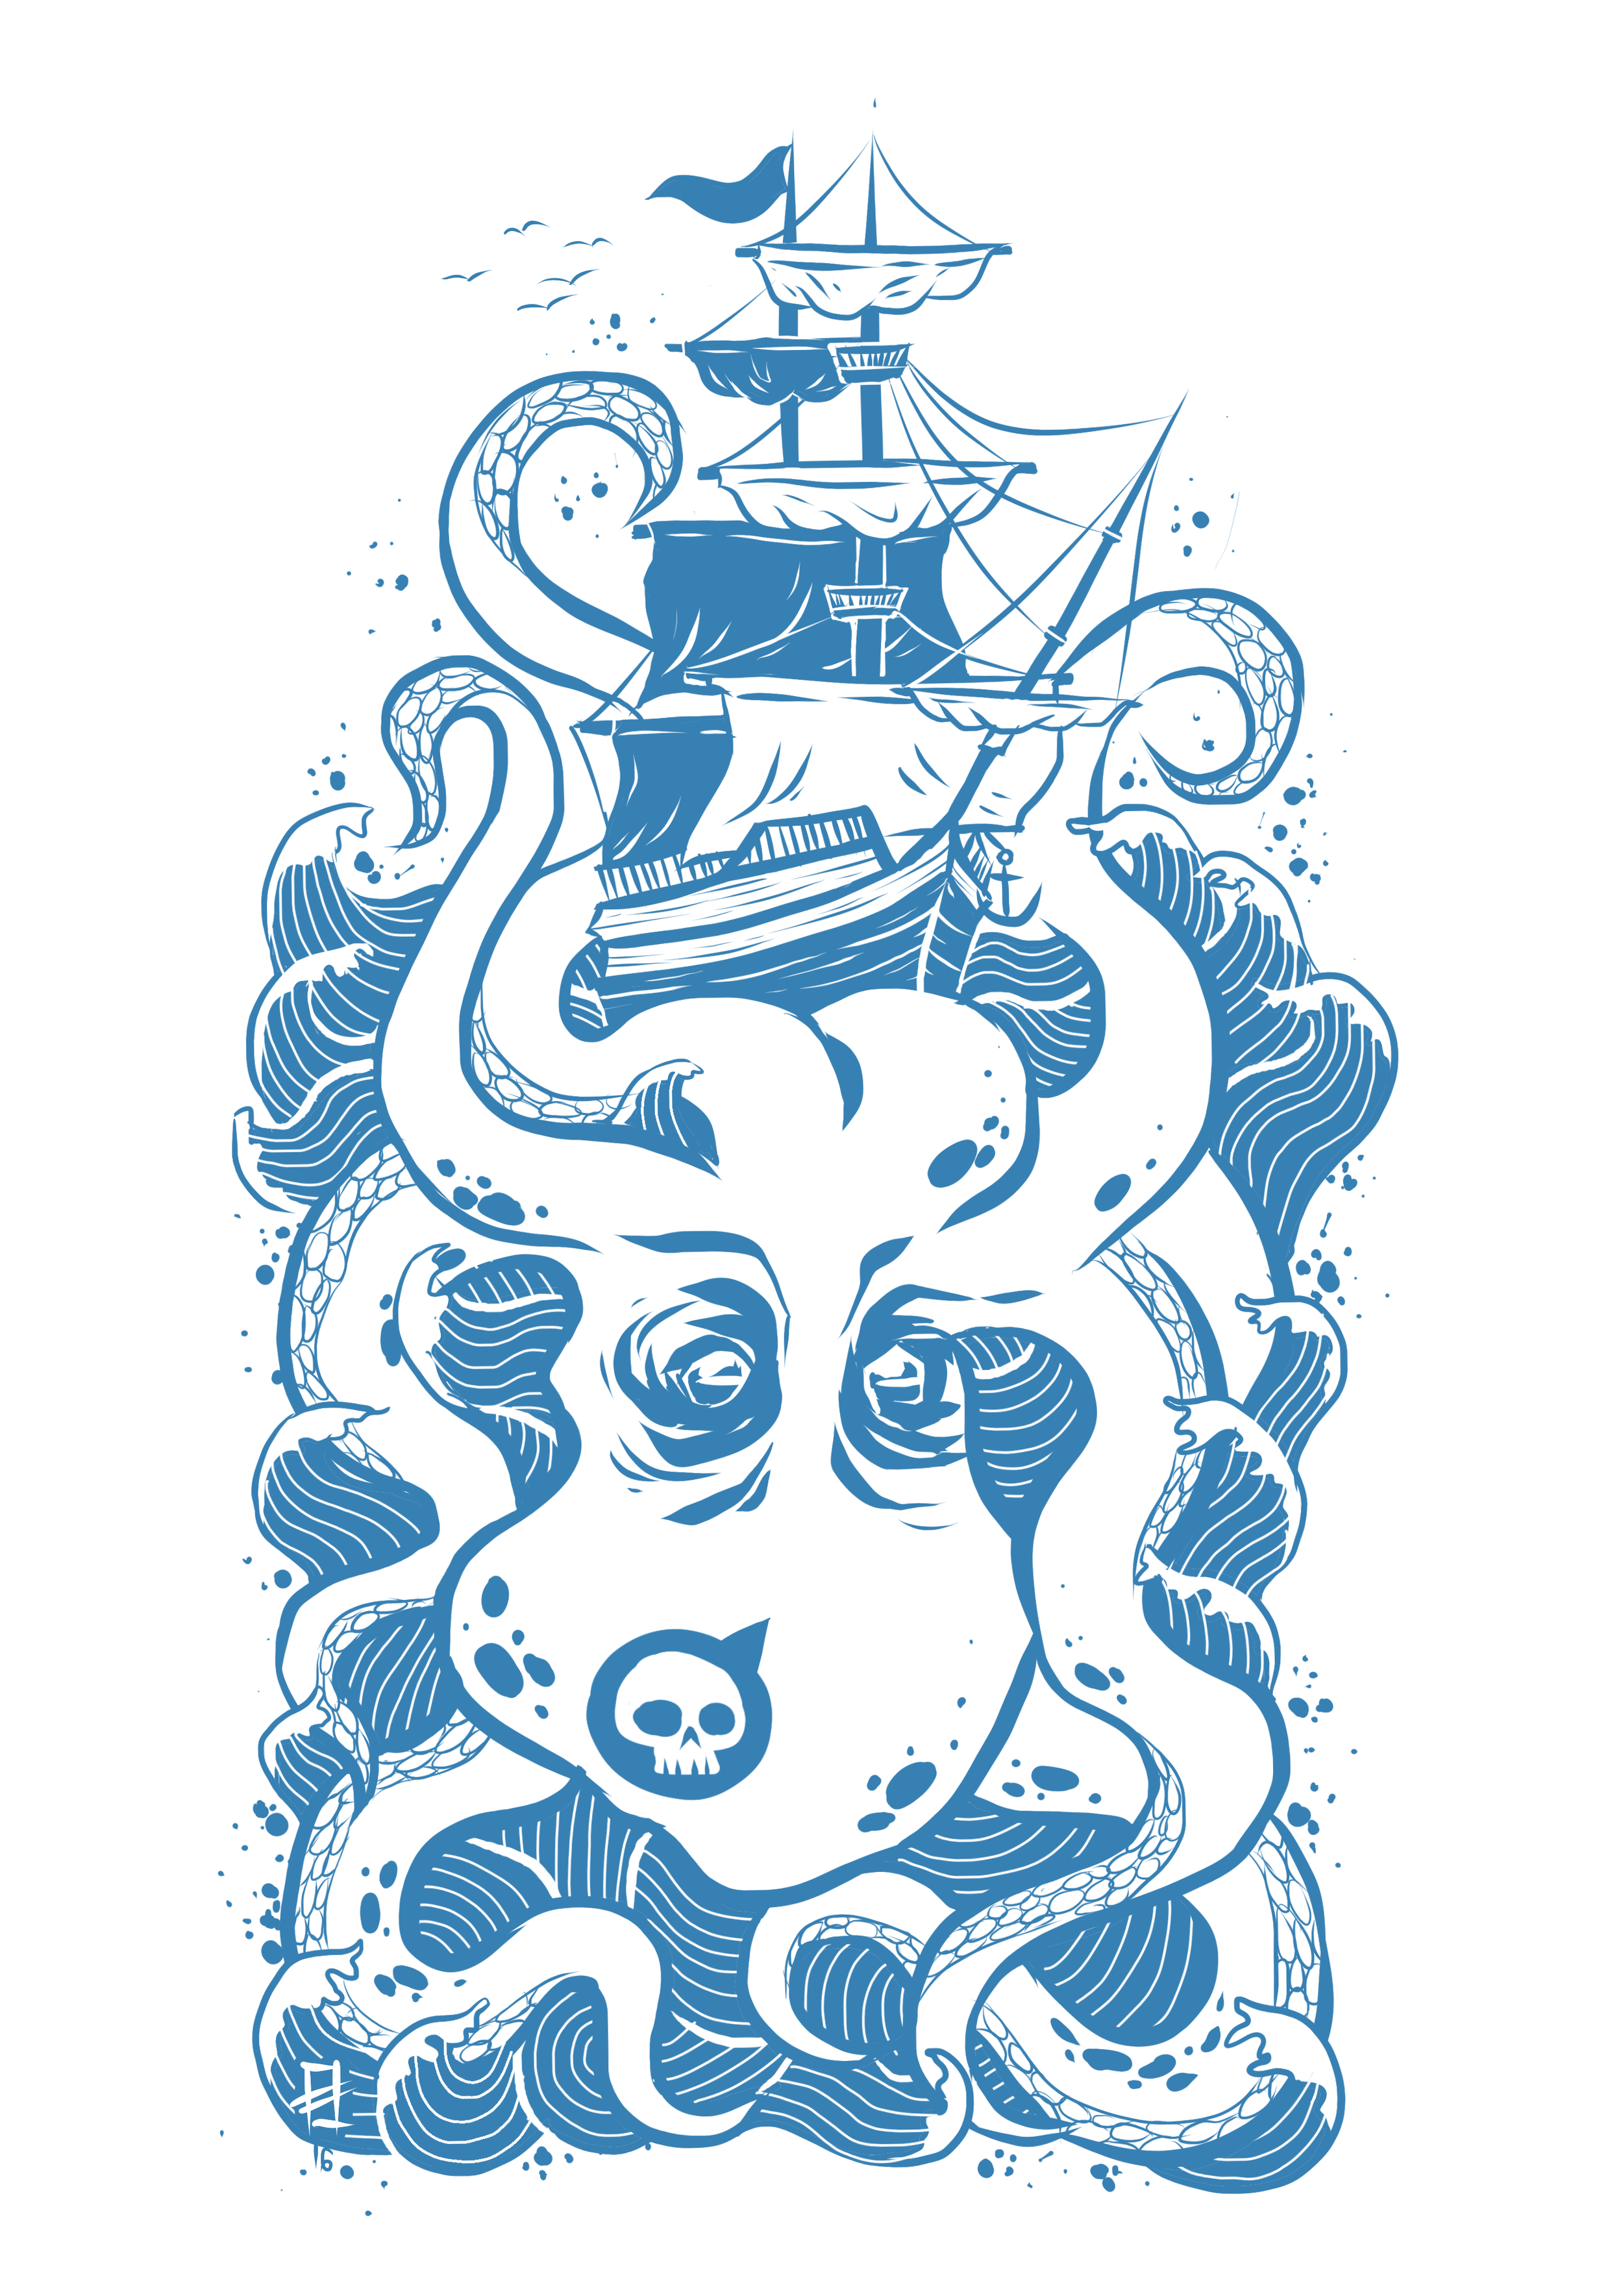 Octopus and ship.jpg